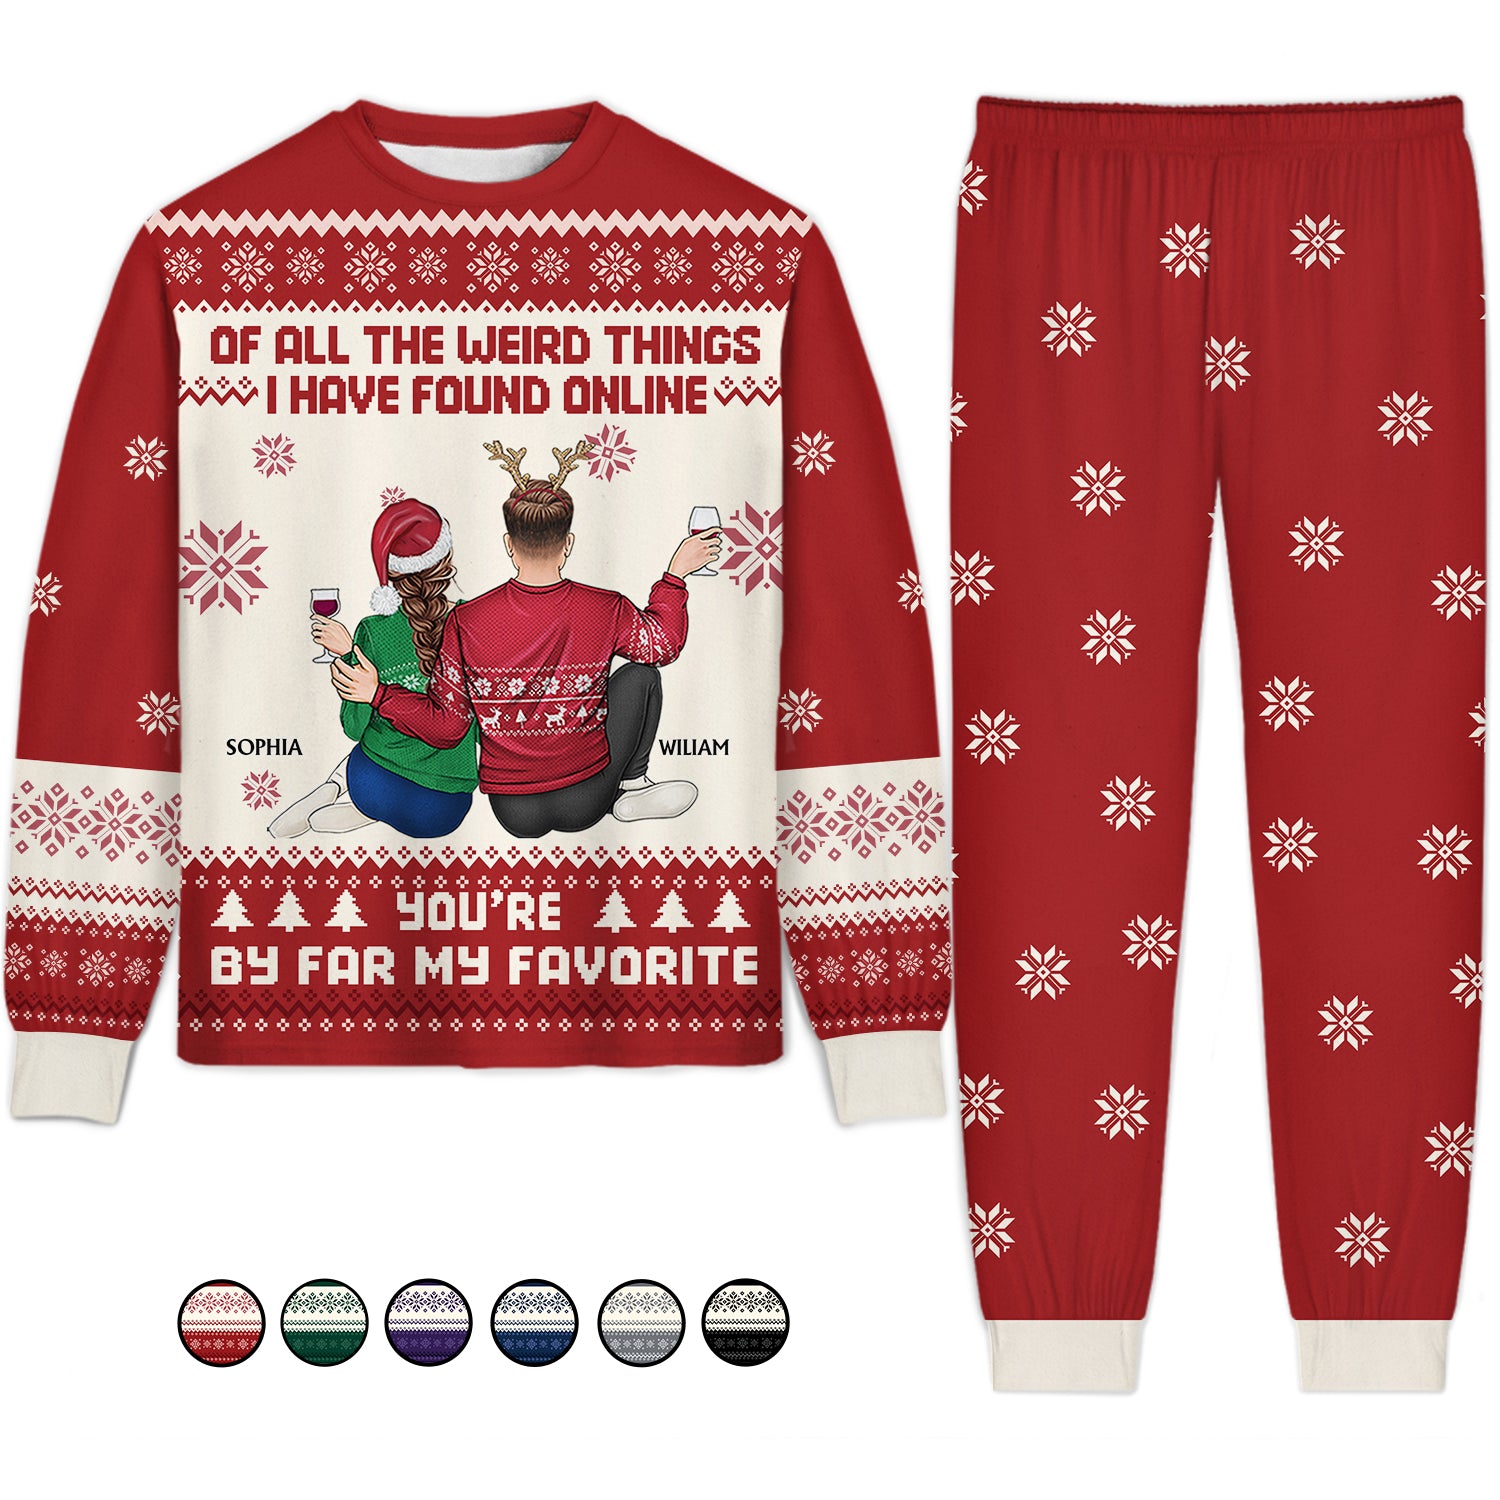 Of All The Weird Things - Christmas Gift For Couples, Husband, Wife - Personalized Unisex Pajamas Set